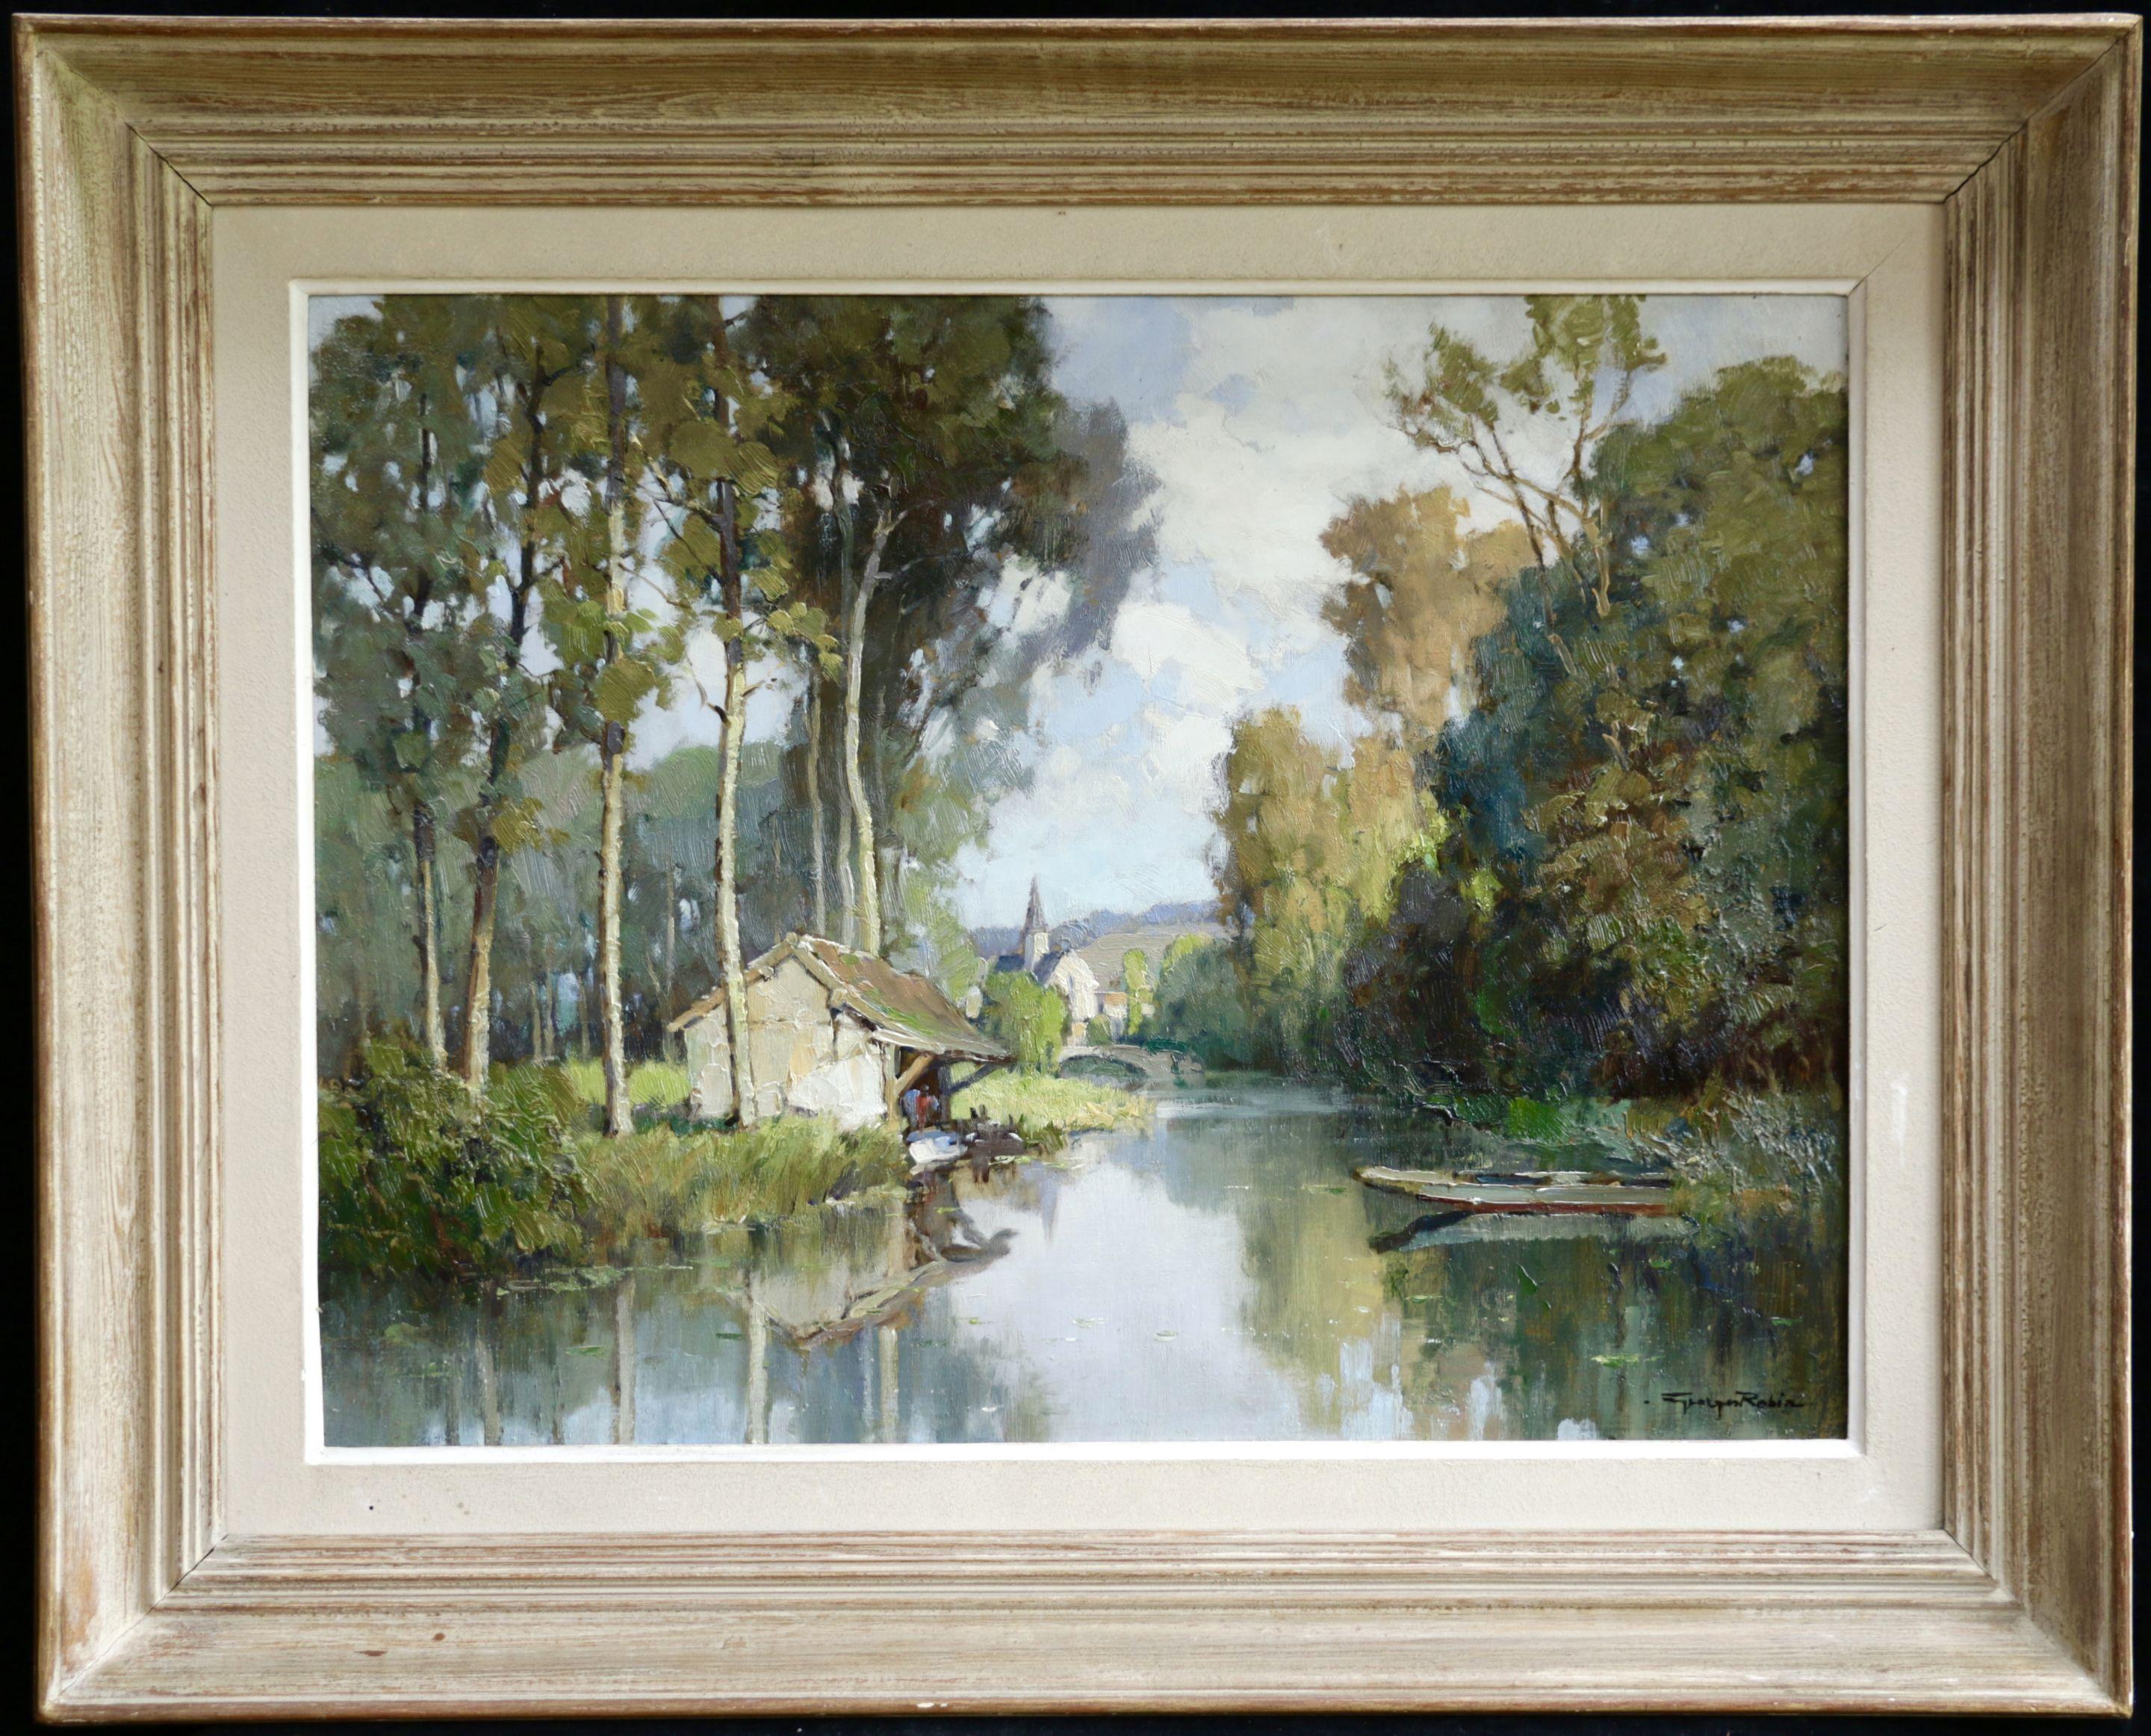 Lavoir sur L'Eure- 20th Century Oil, River & Trees in Landscape by Georges Robin - Painting by Georges Charles Robin